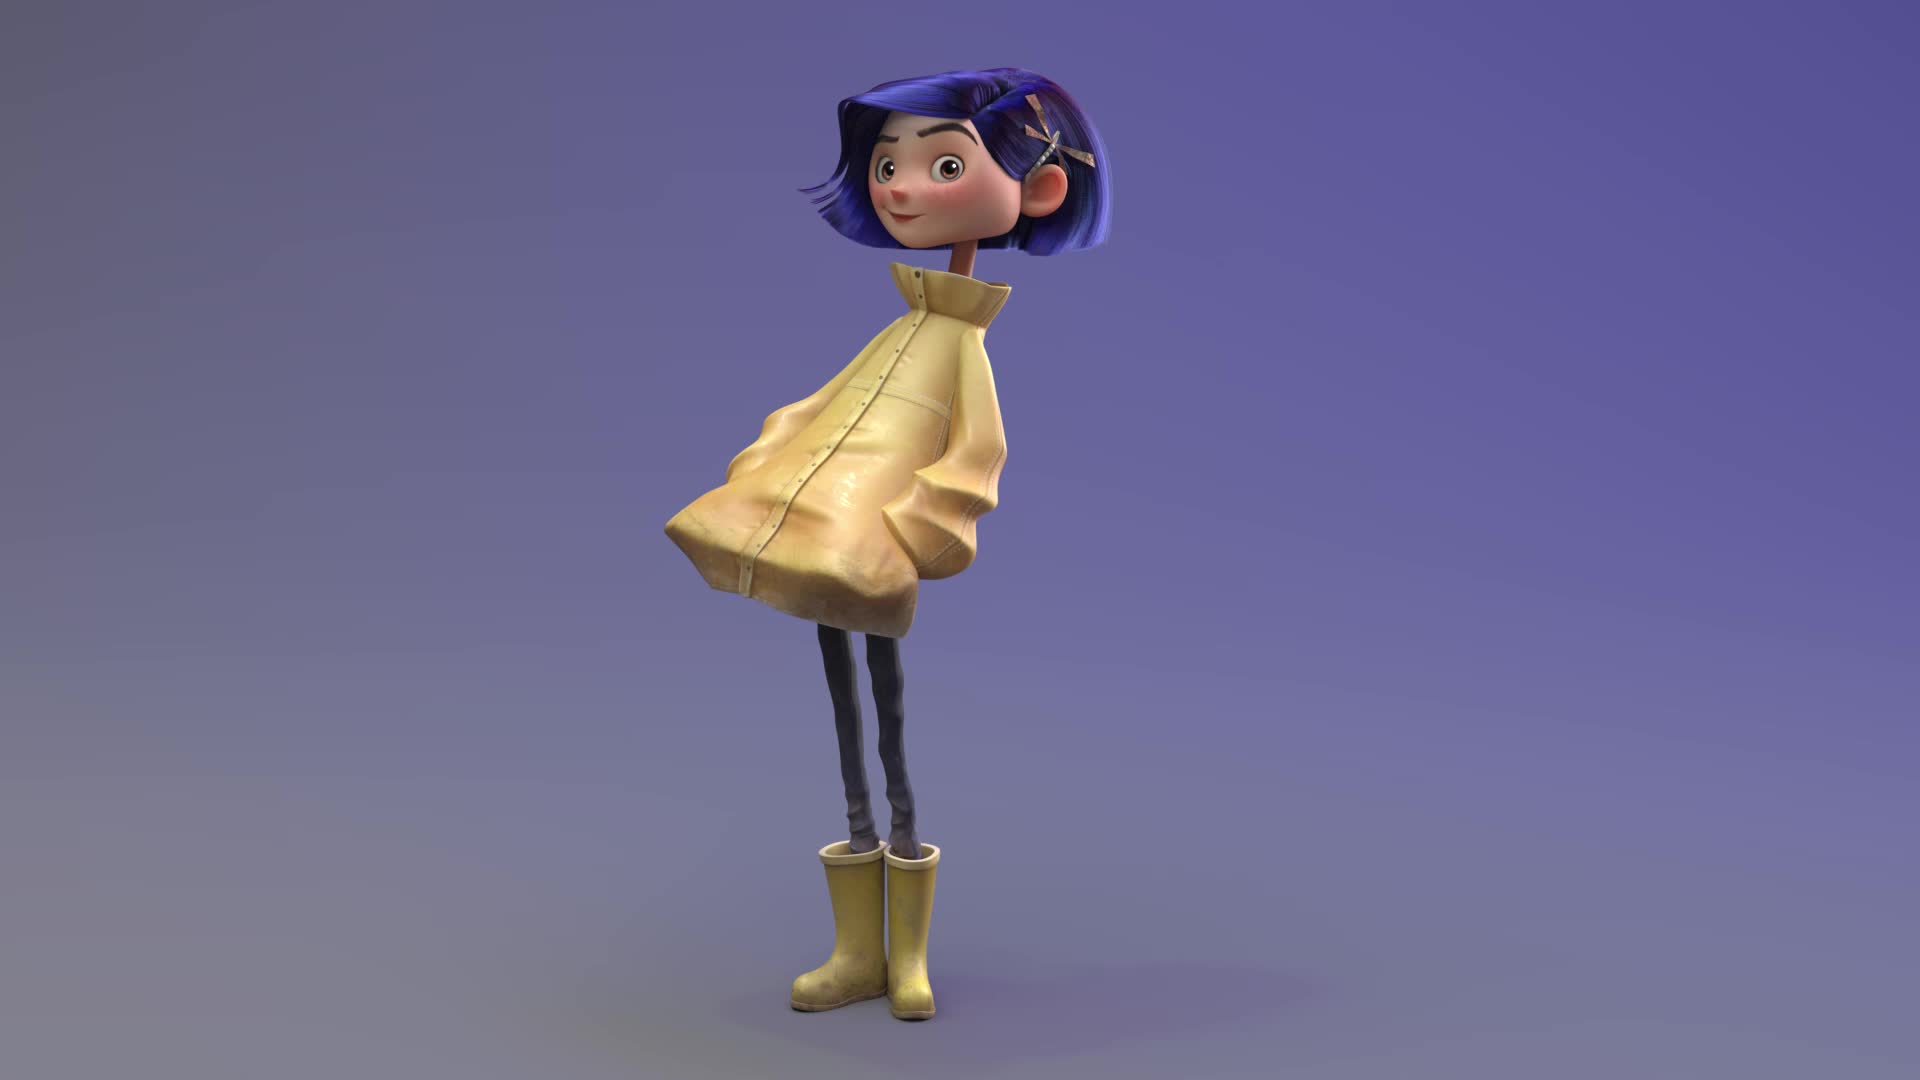 ArtStation - Coraline - Fanmade Book Cover